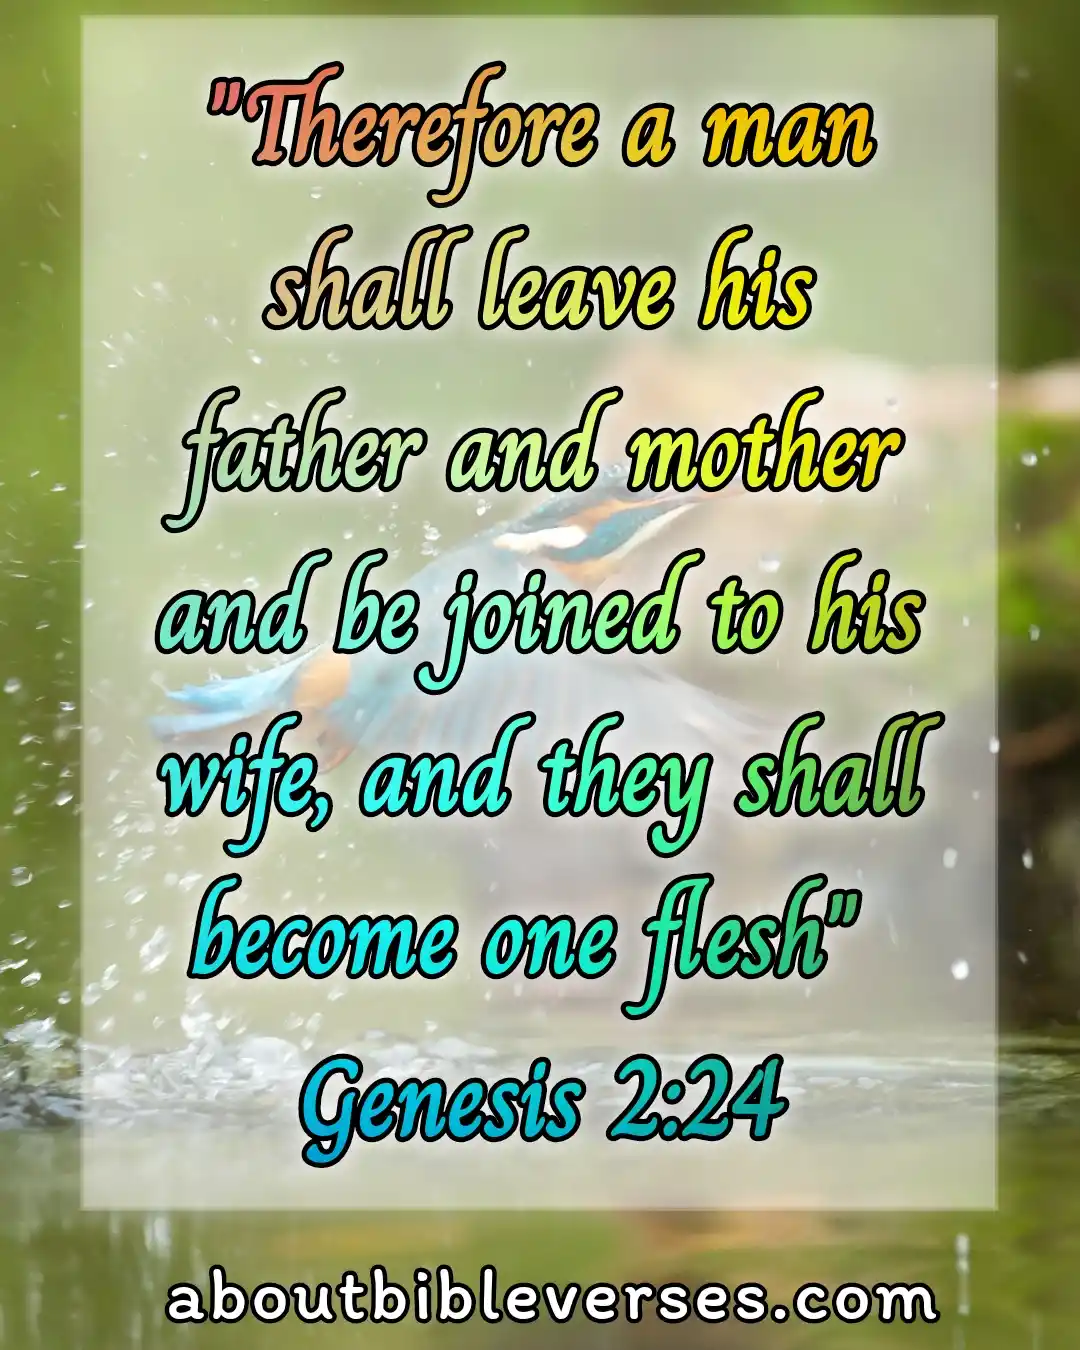 bible verses husband and wife relationship (Genesis 2:24)